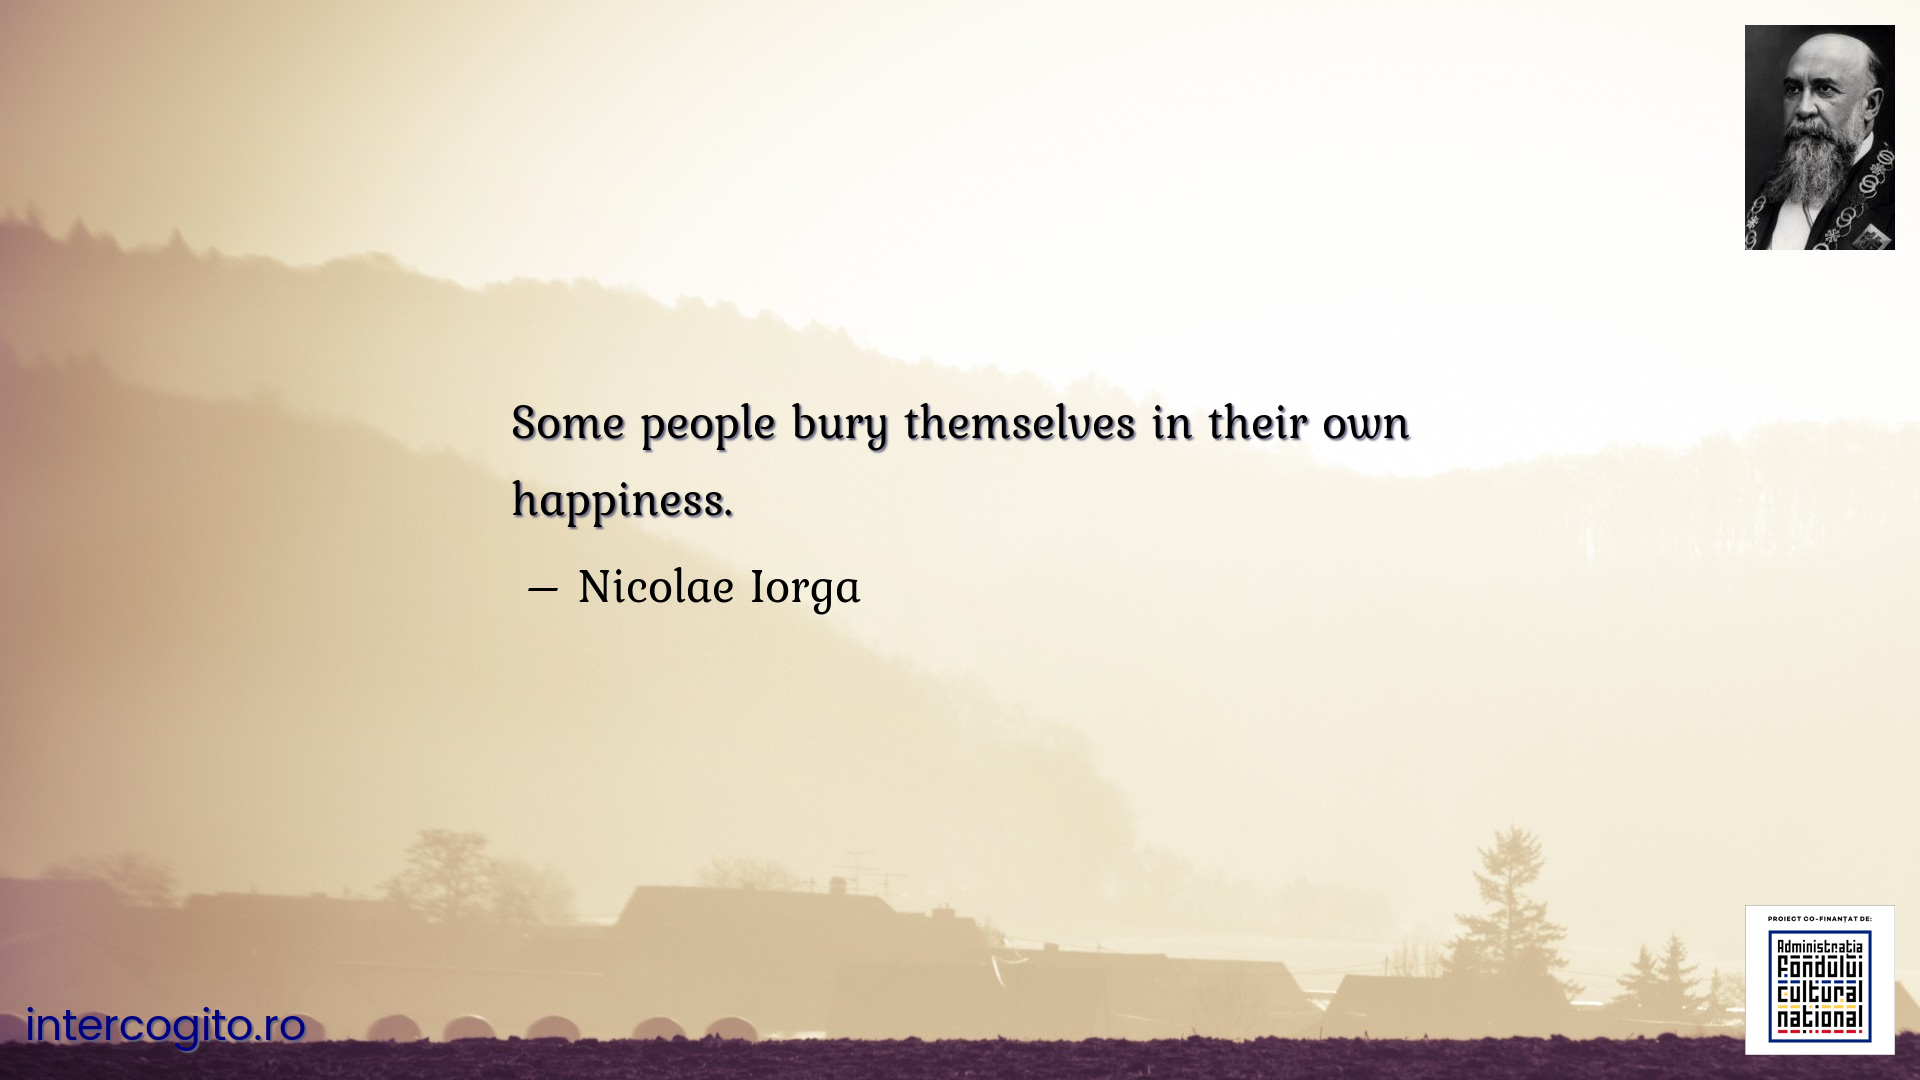 Some people bury themselves in their own happiness.